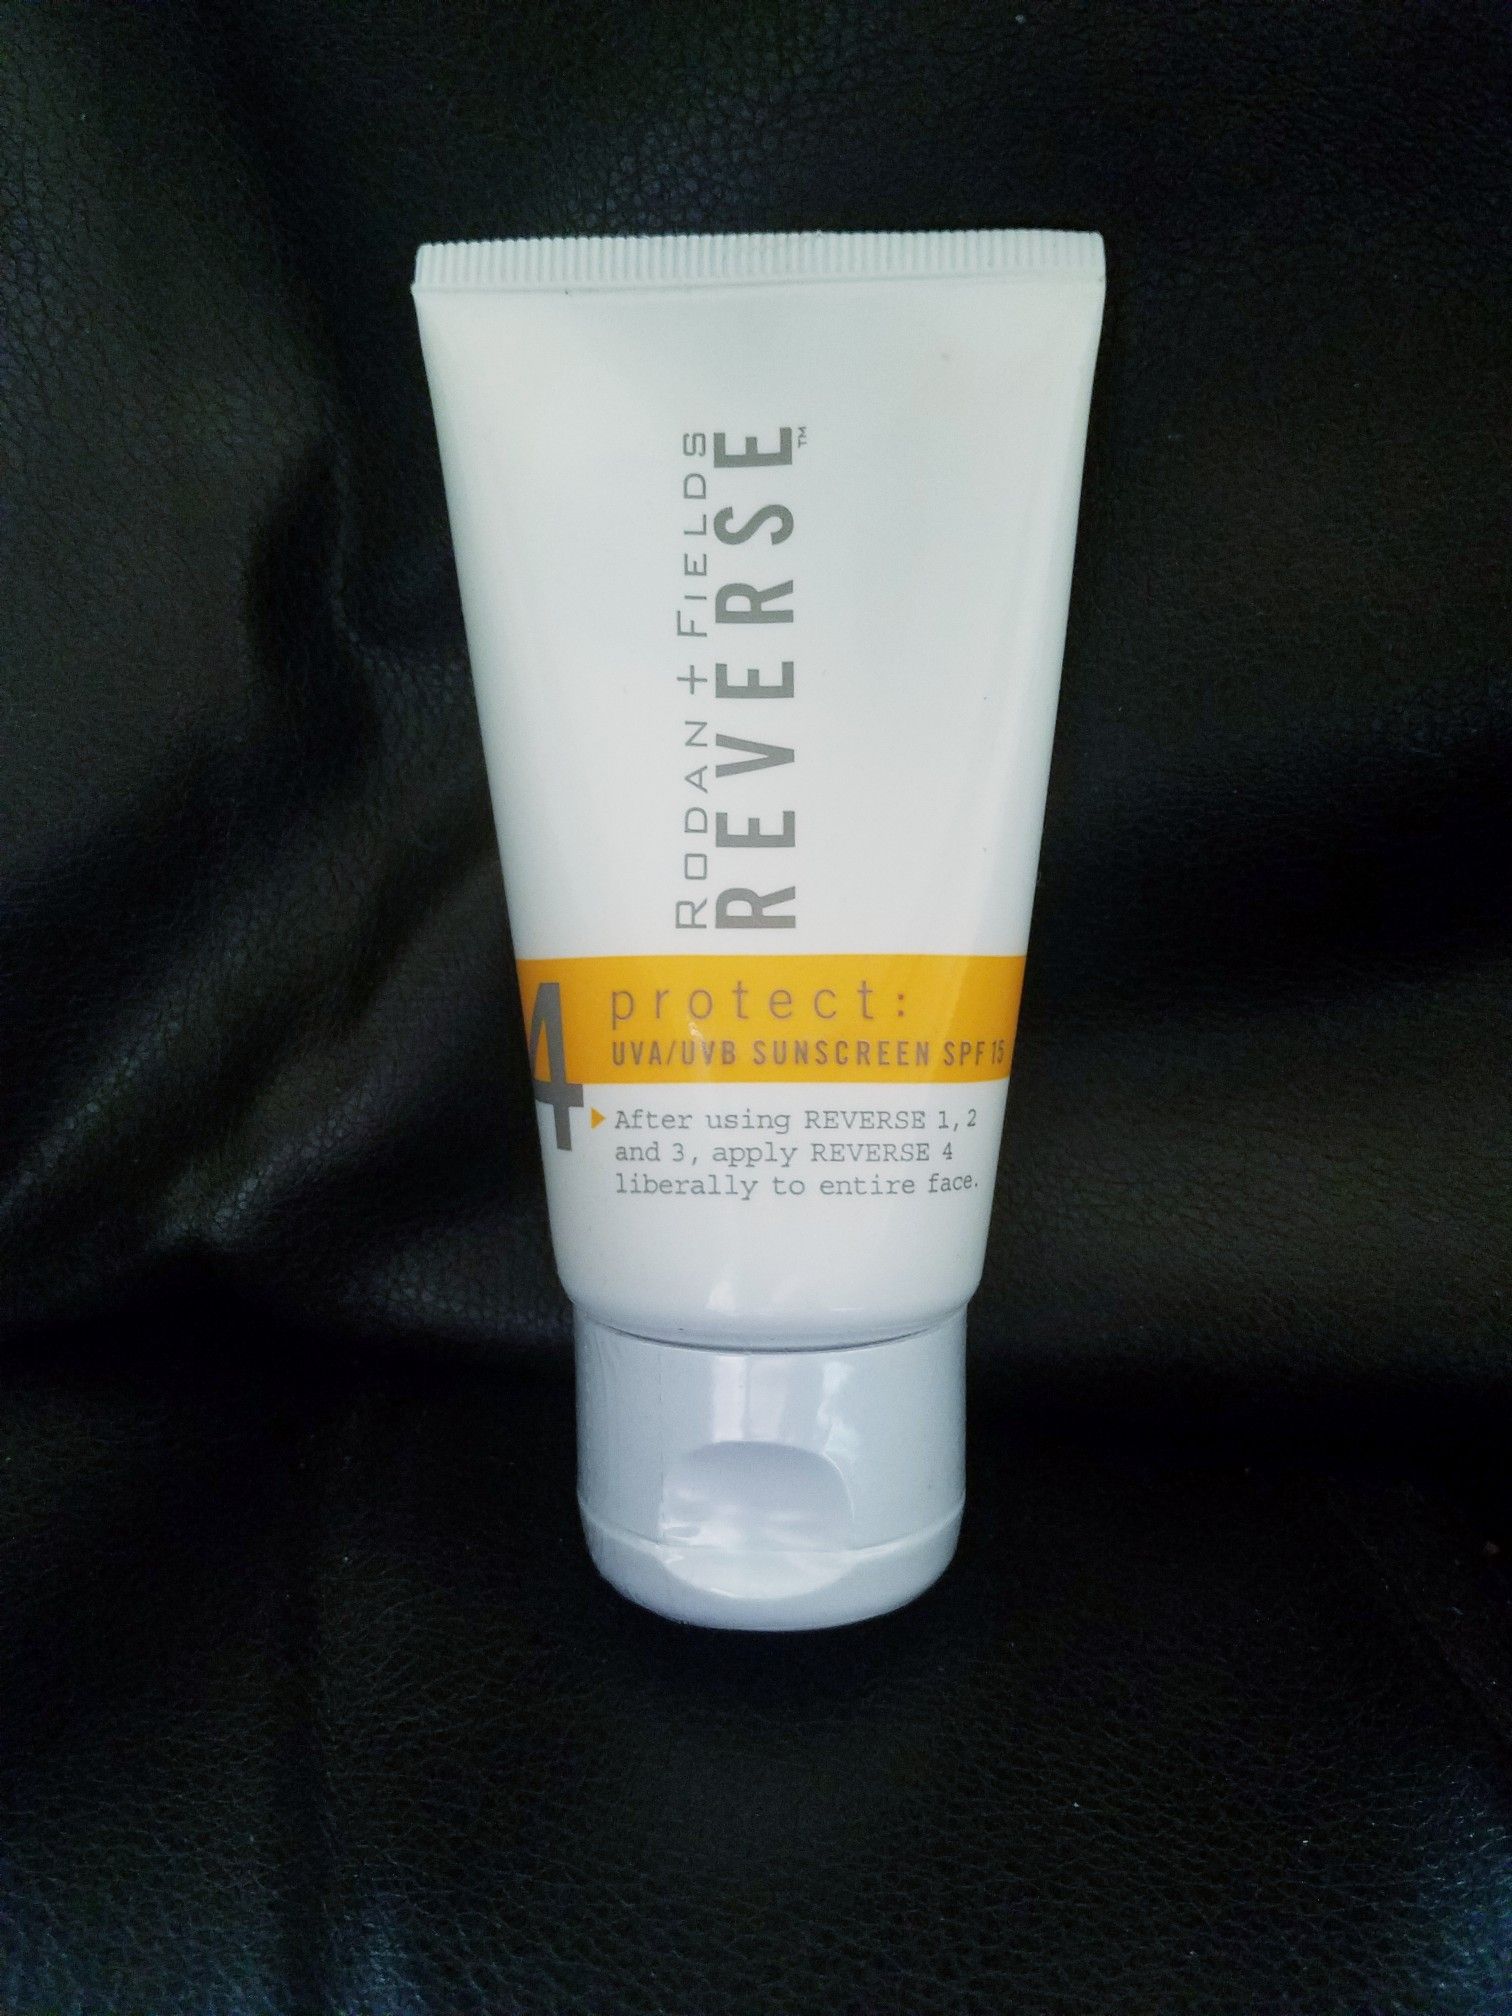 Rodan and Fields Reverse Protect Sunscreen *NWOT